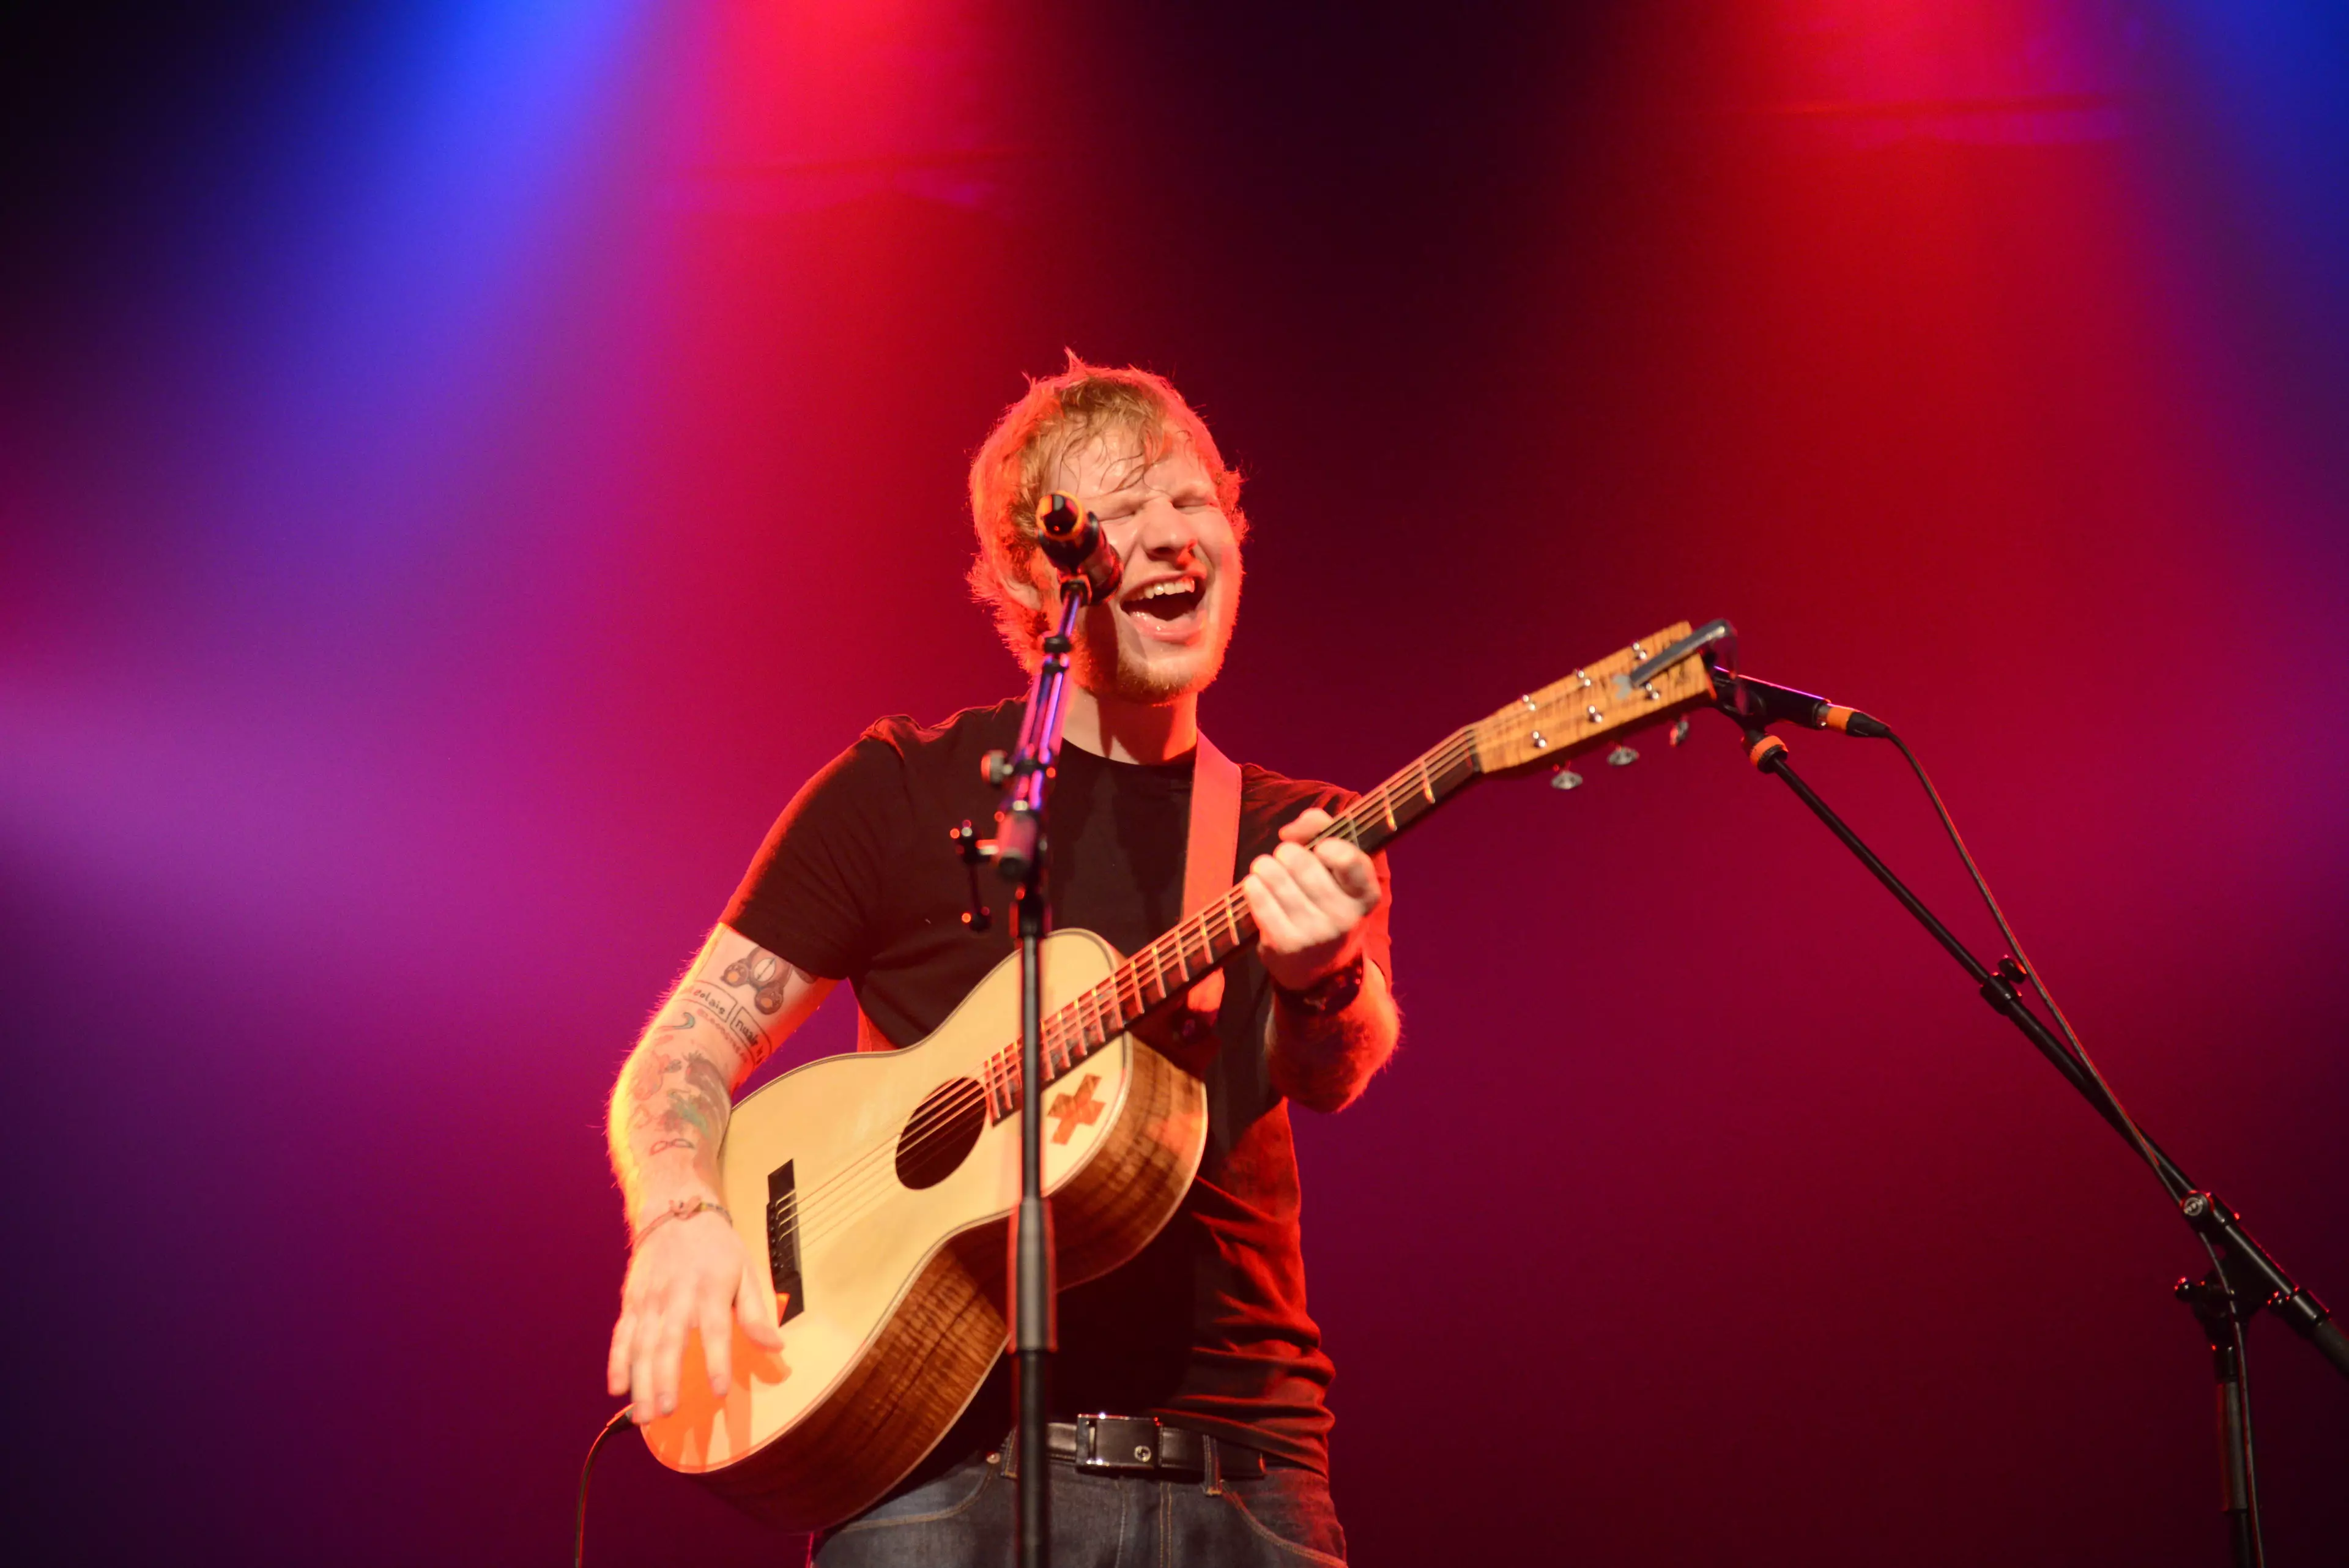 Ed Sheeran performs on stage during his concert in Cologne, Germany in 2014.